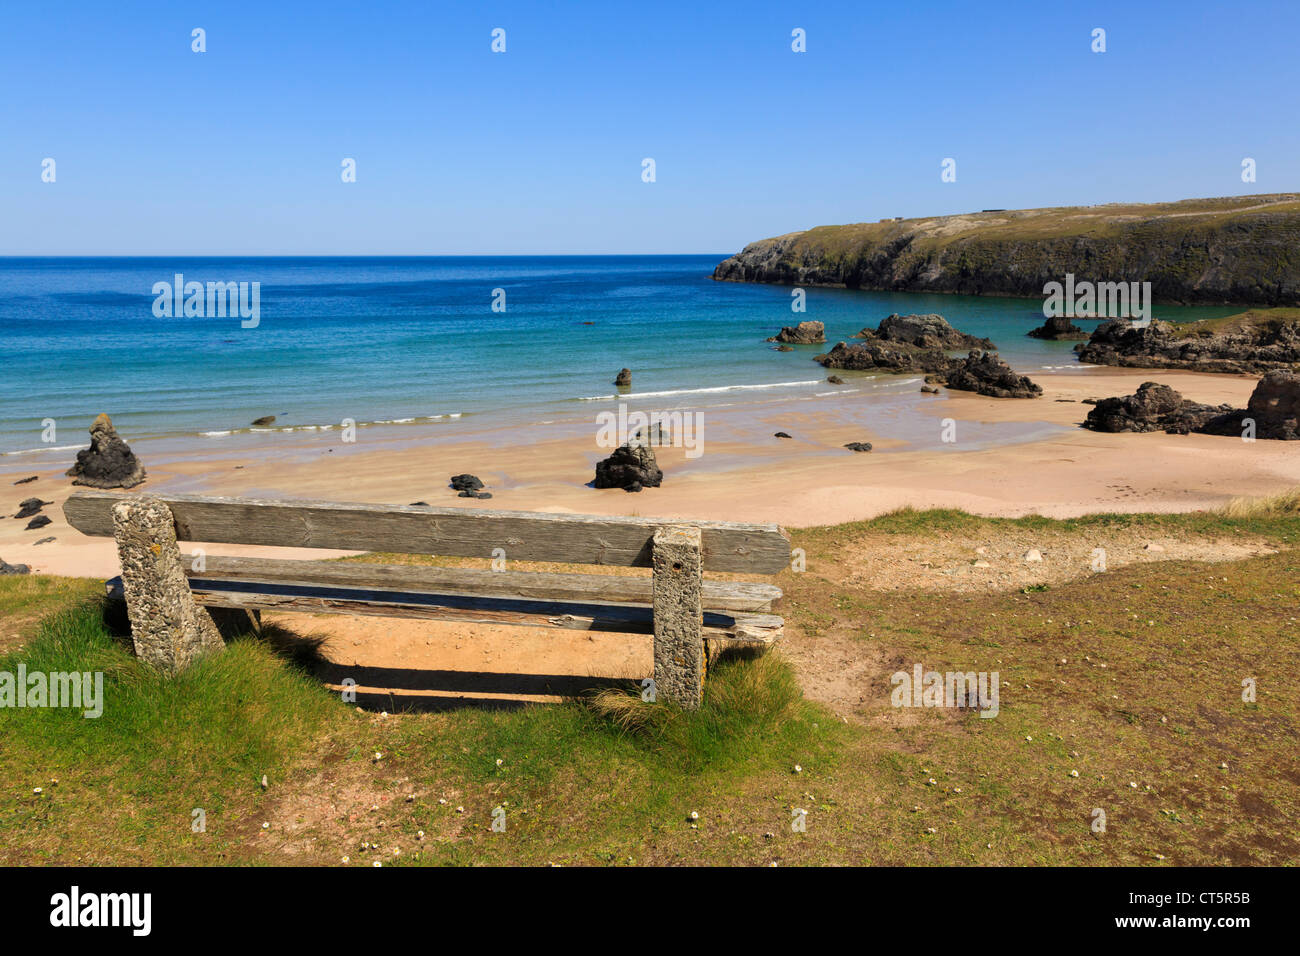 Bench overlooking beach of golden sands and turquoise sea on scenic north west coast Sango Bay Durness Sutherland Scotland UK Stock Photo